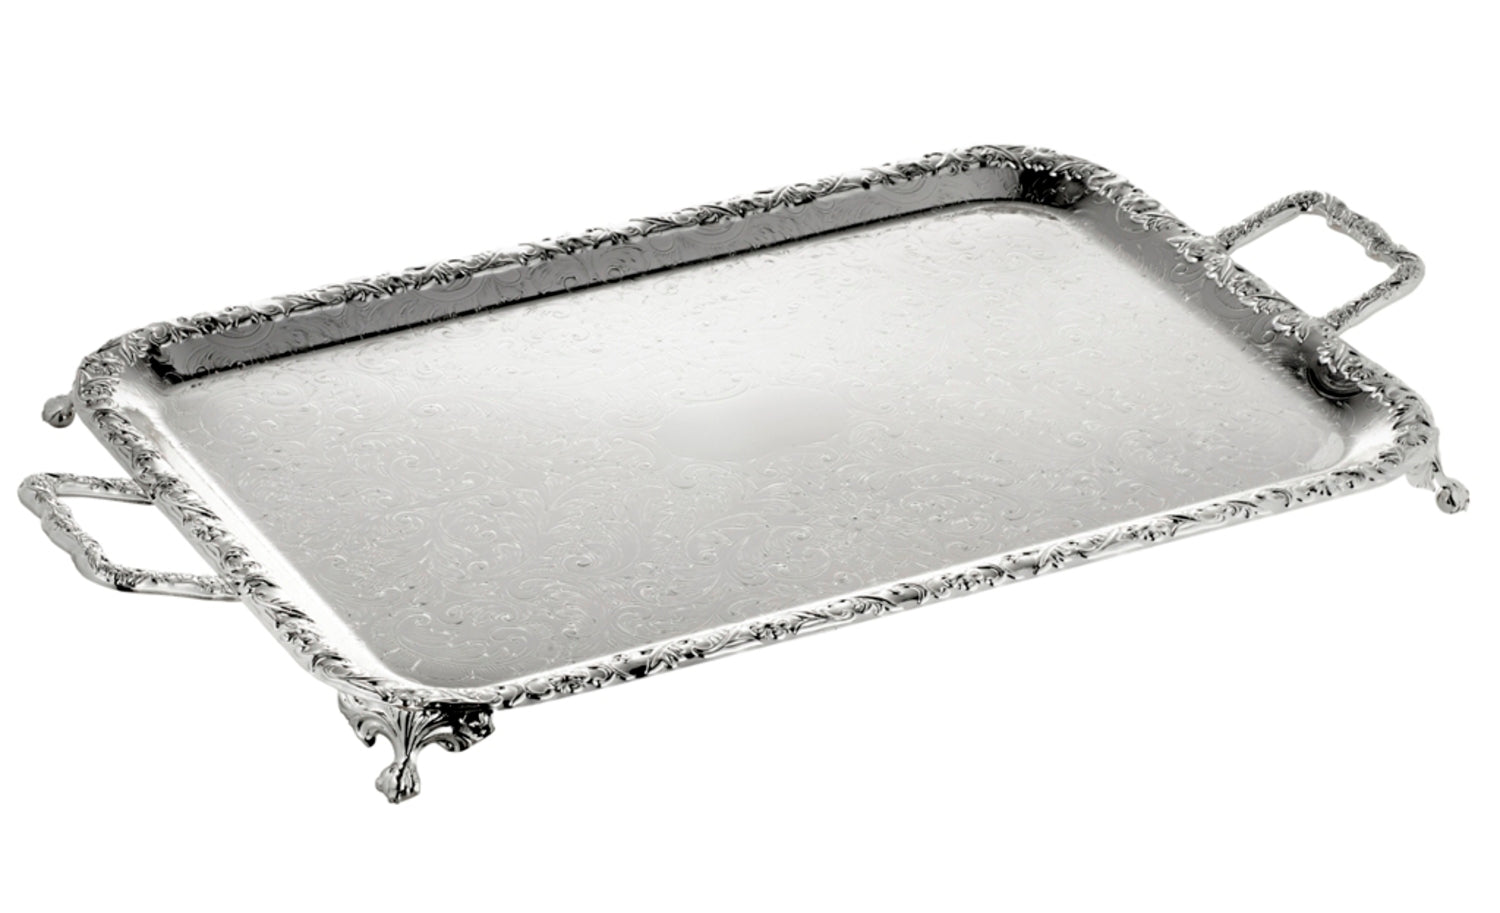 Queen Anne Oblong Tray with Handles and Legs -51x29 cm -Silver Plated